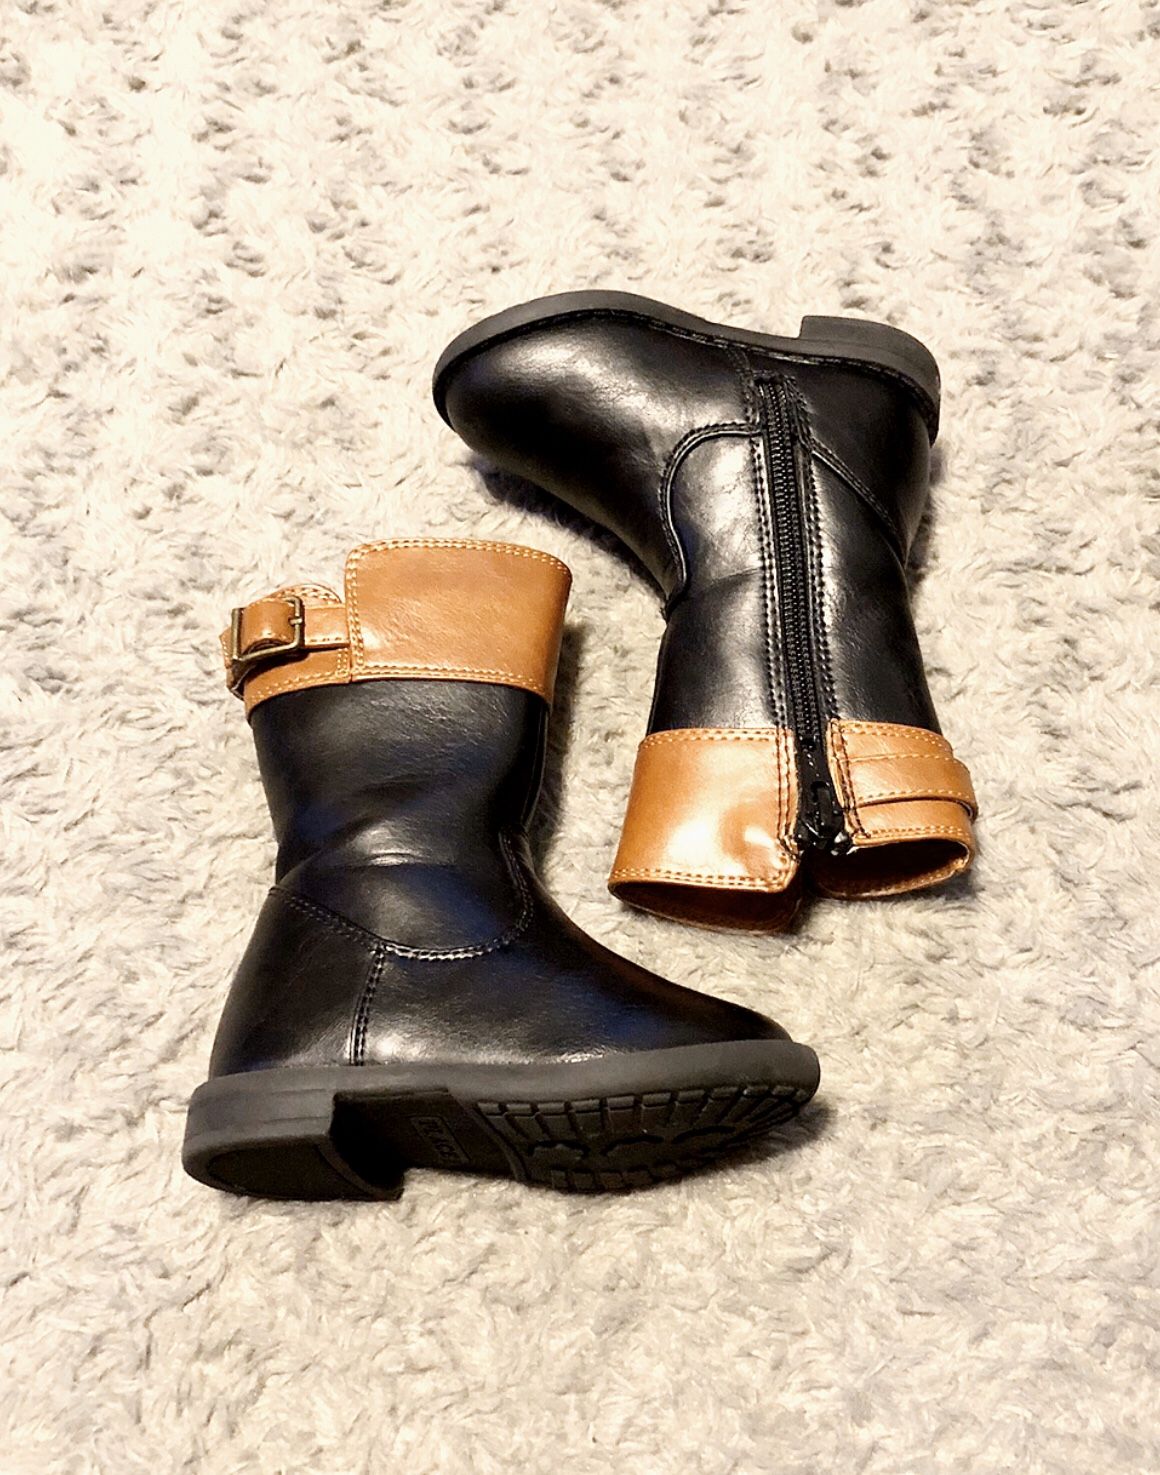 Toddler girl Riding boots paid $45 size 4 great condition normal wear. Purchase from The Children’s Place. Black & brown